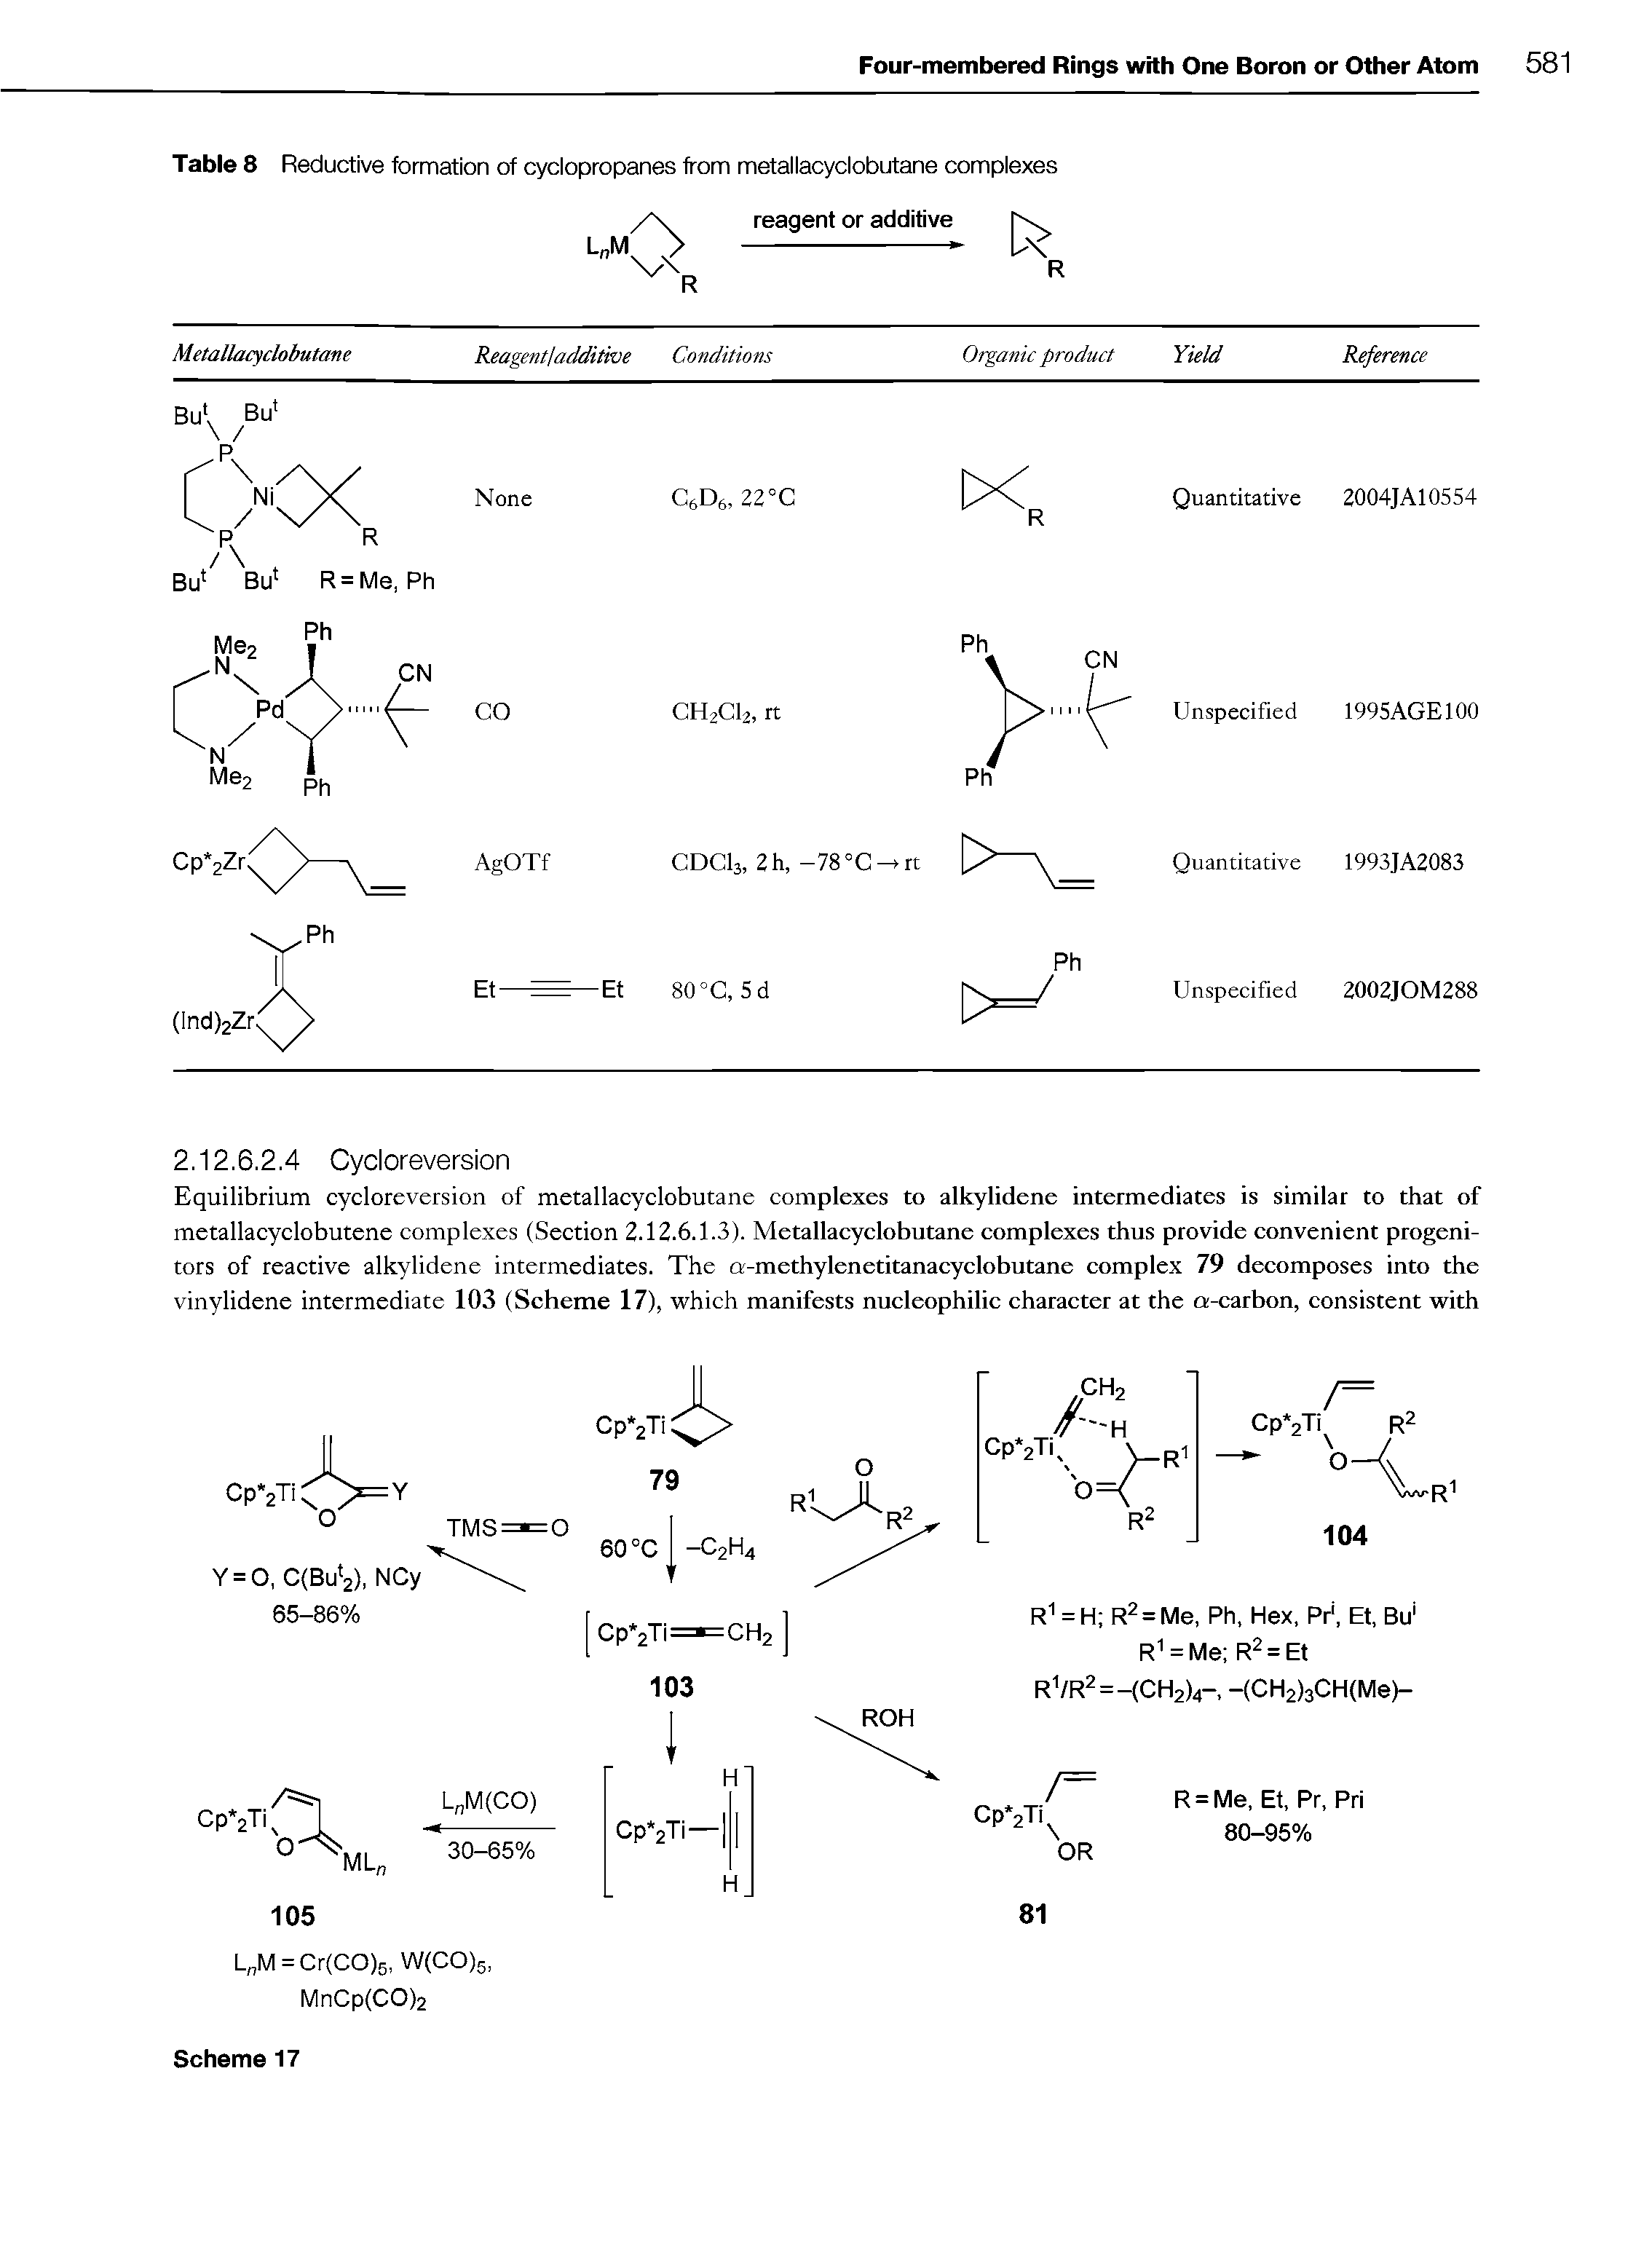 Table 8 Reductive formation of cyclopropanes from metallacyclobutane complexes...